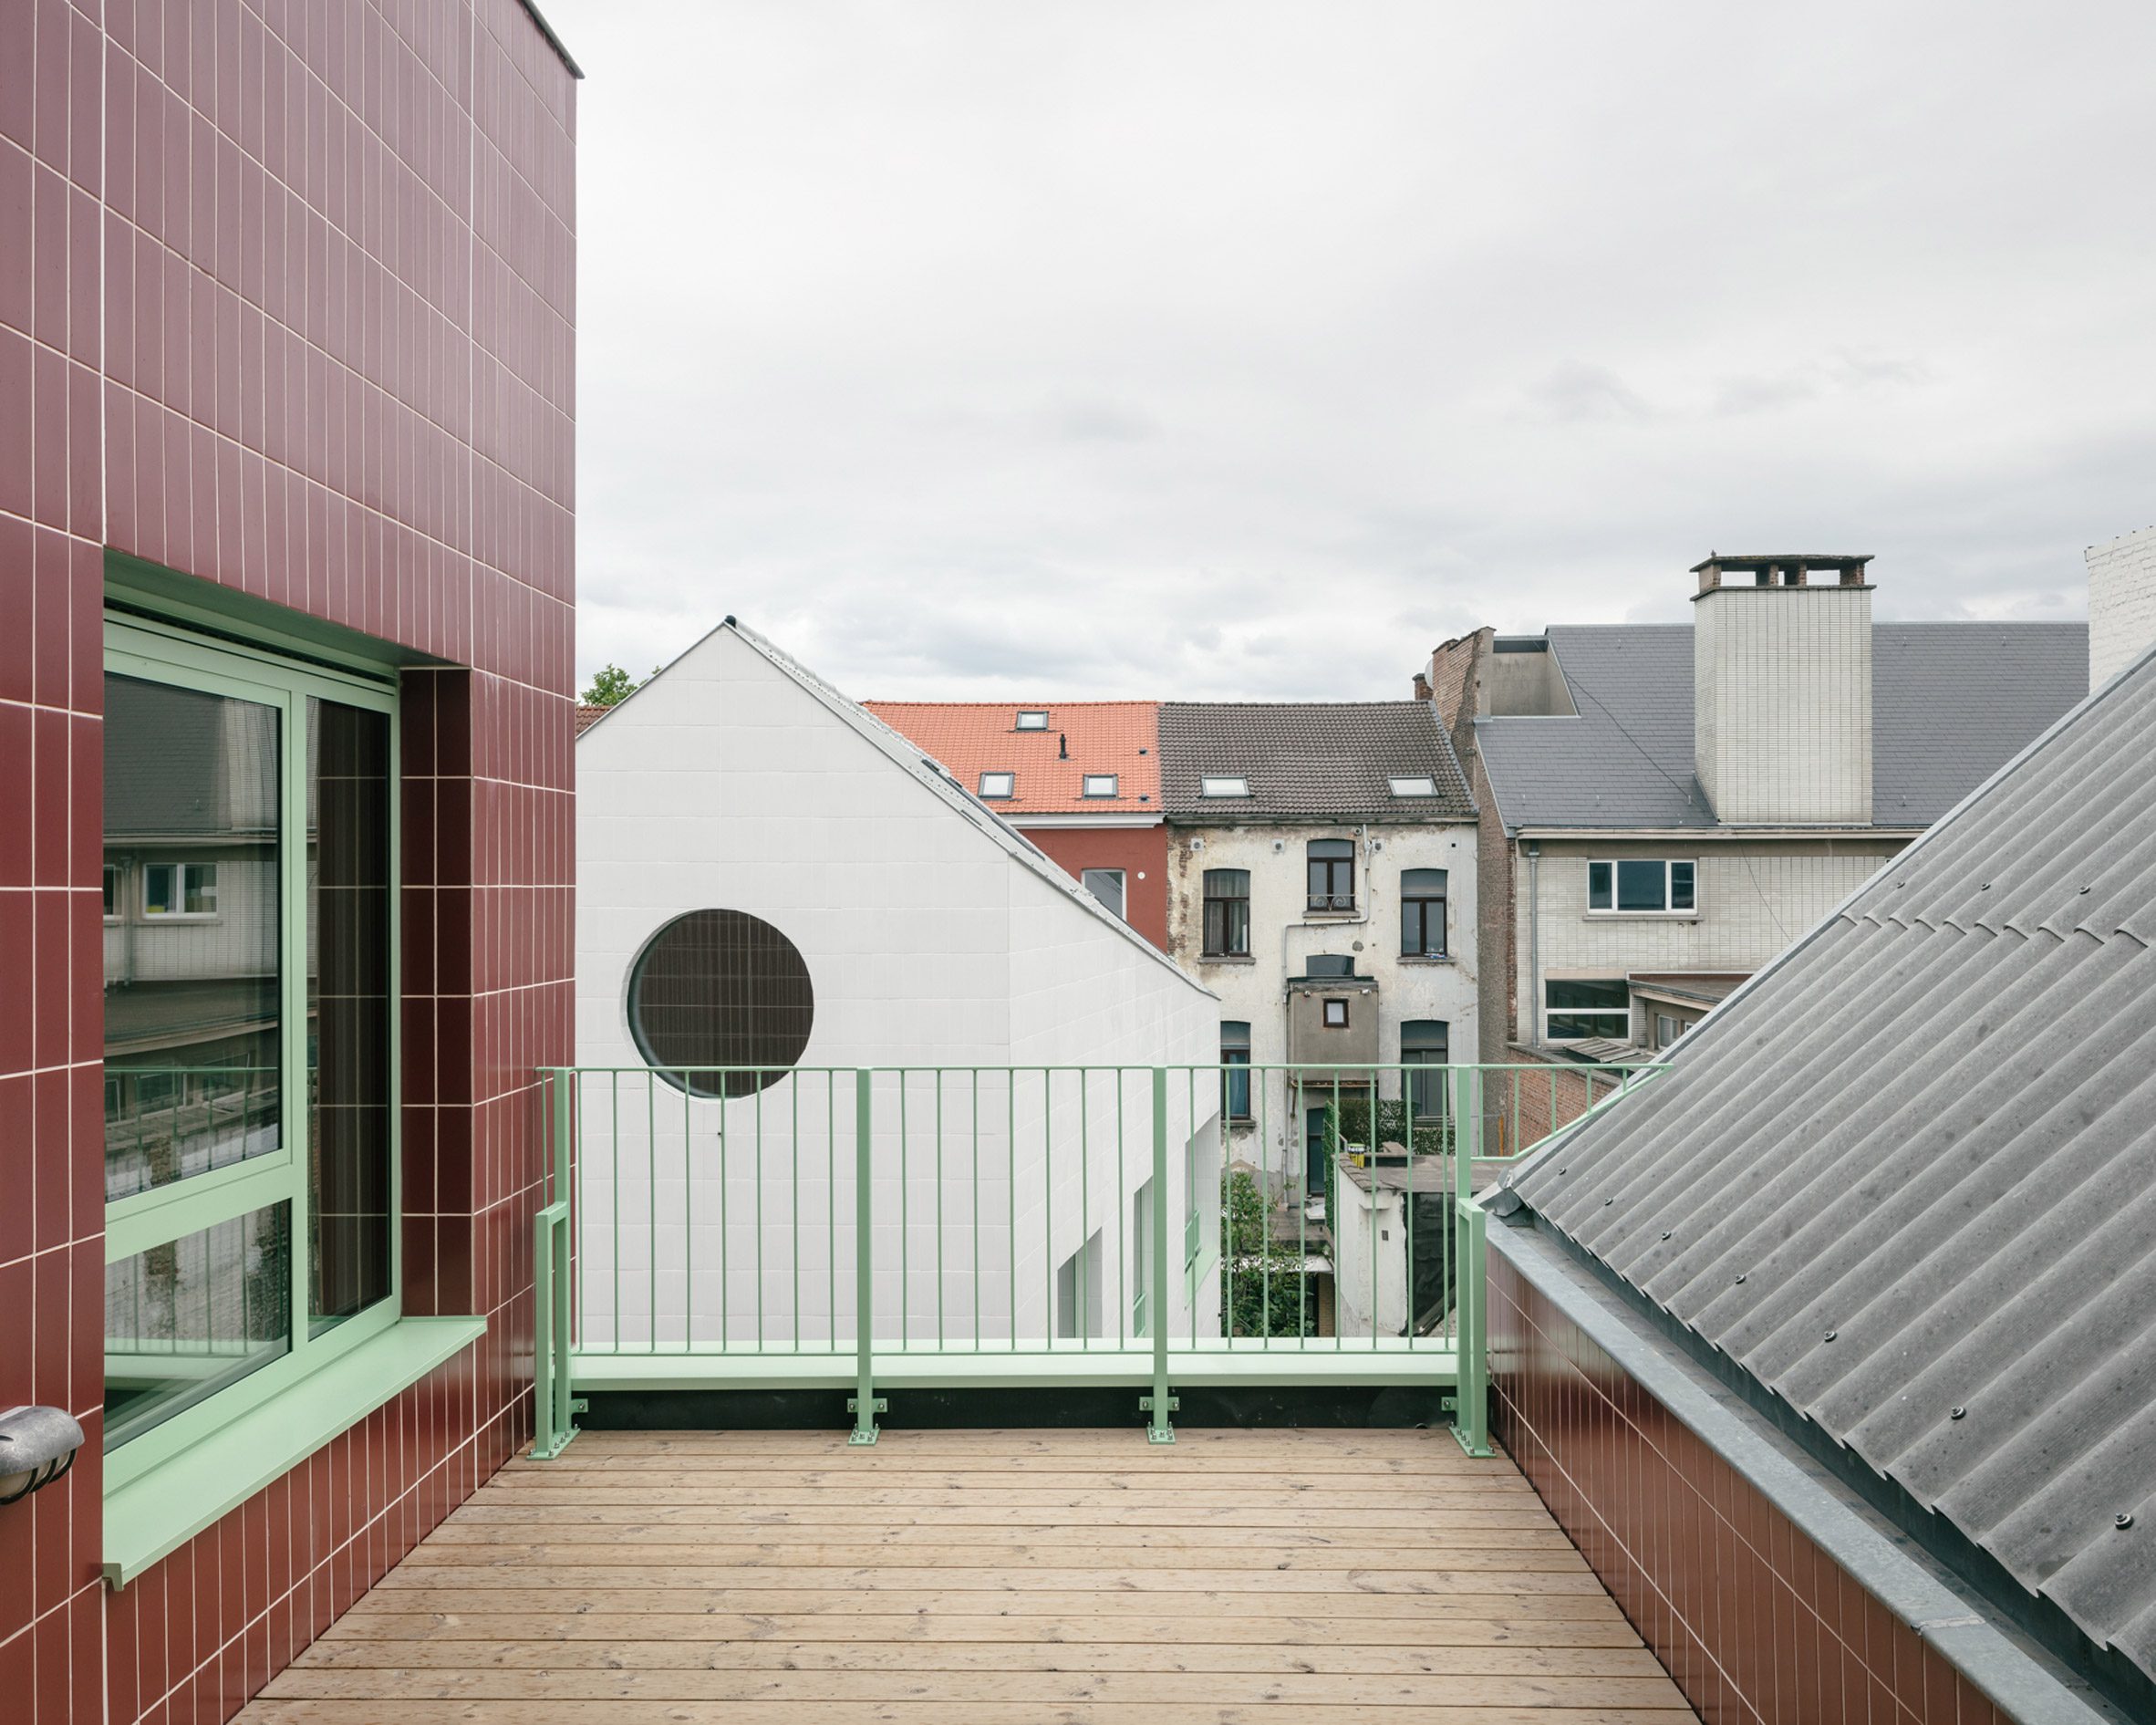 Terrace of Brussels housing by Notan Office